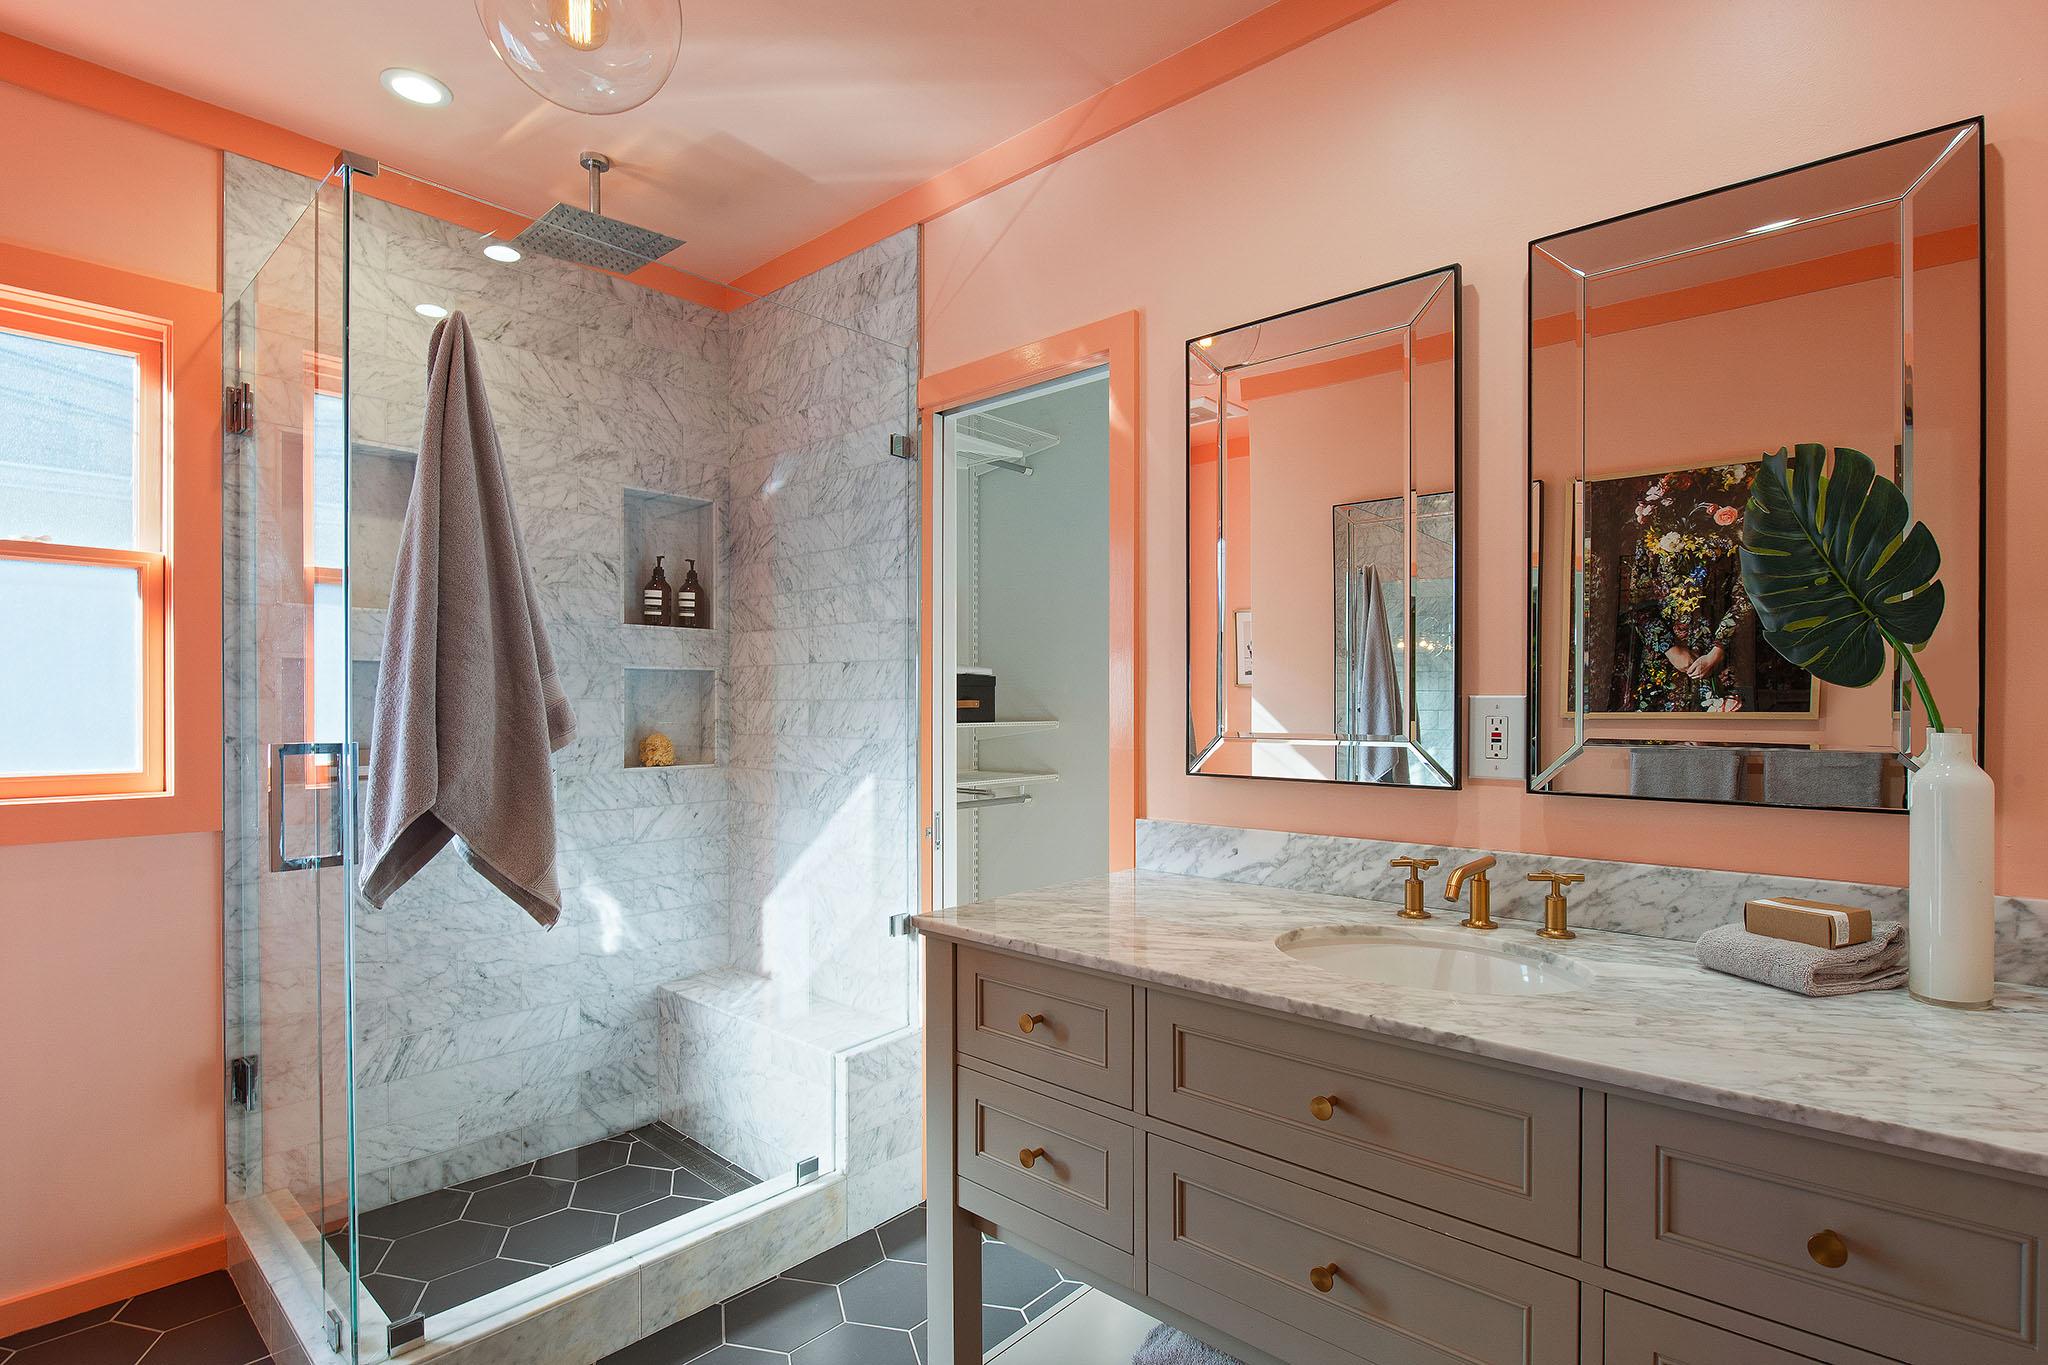 Bathroom with brightly colored walls, a vanity and glass shower #15